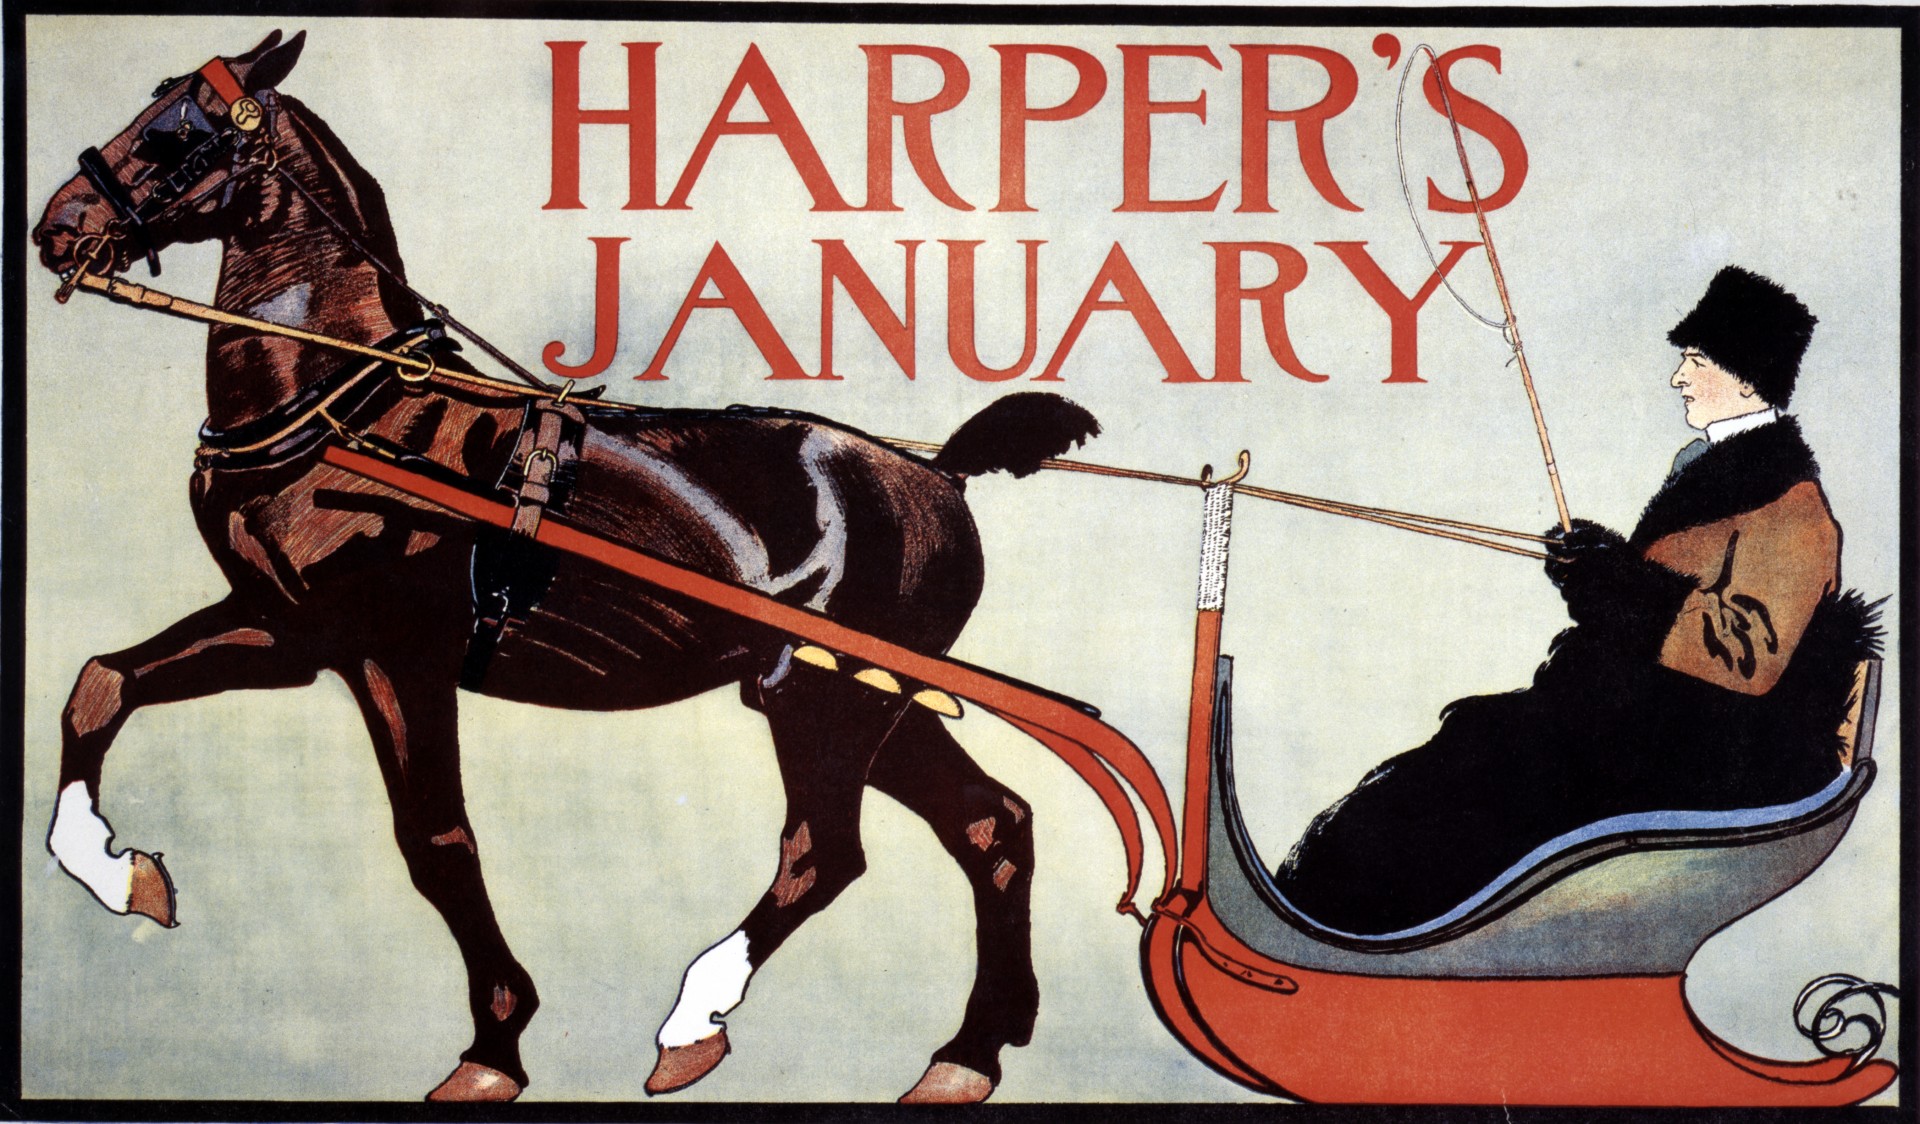 Public domain vintage image of front cover of January Harpers magazine